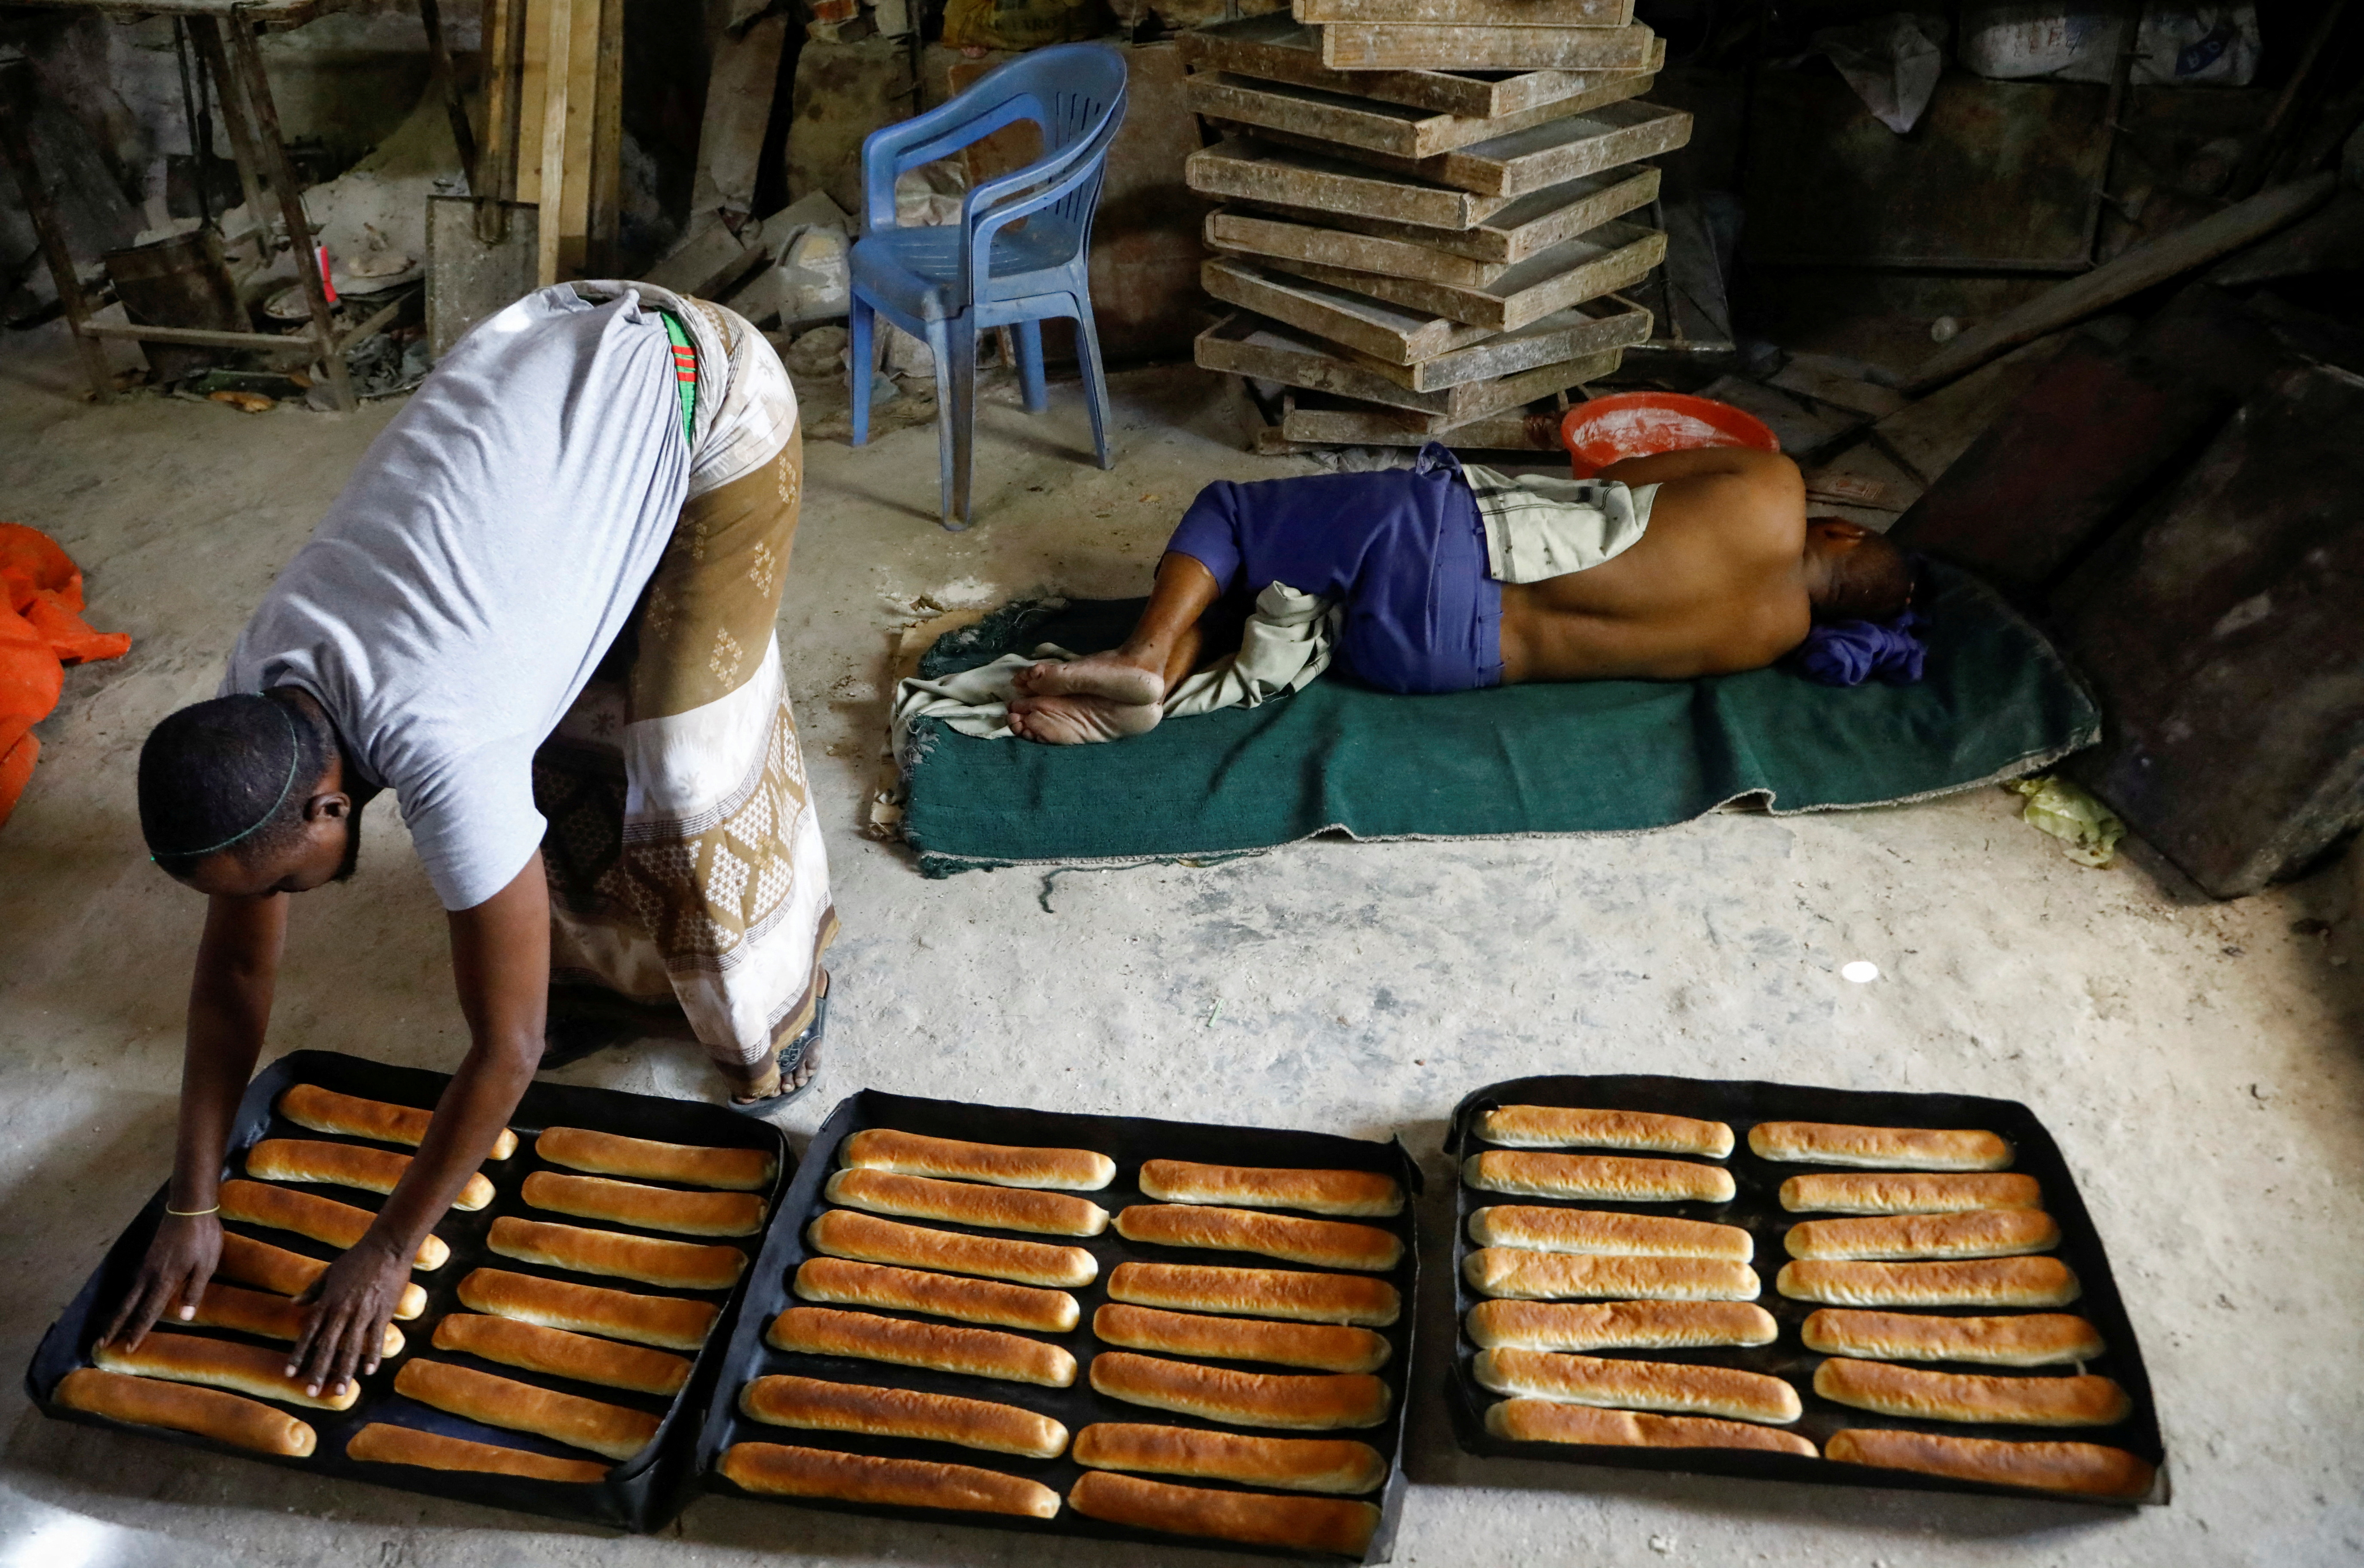 A worker prepares baked goods with wheat from Ukraine as his colleague rests at a bakery, in Hodan district in Mogadishu, Somalia July 16, 2023. REUTERS/Feisal Omar